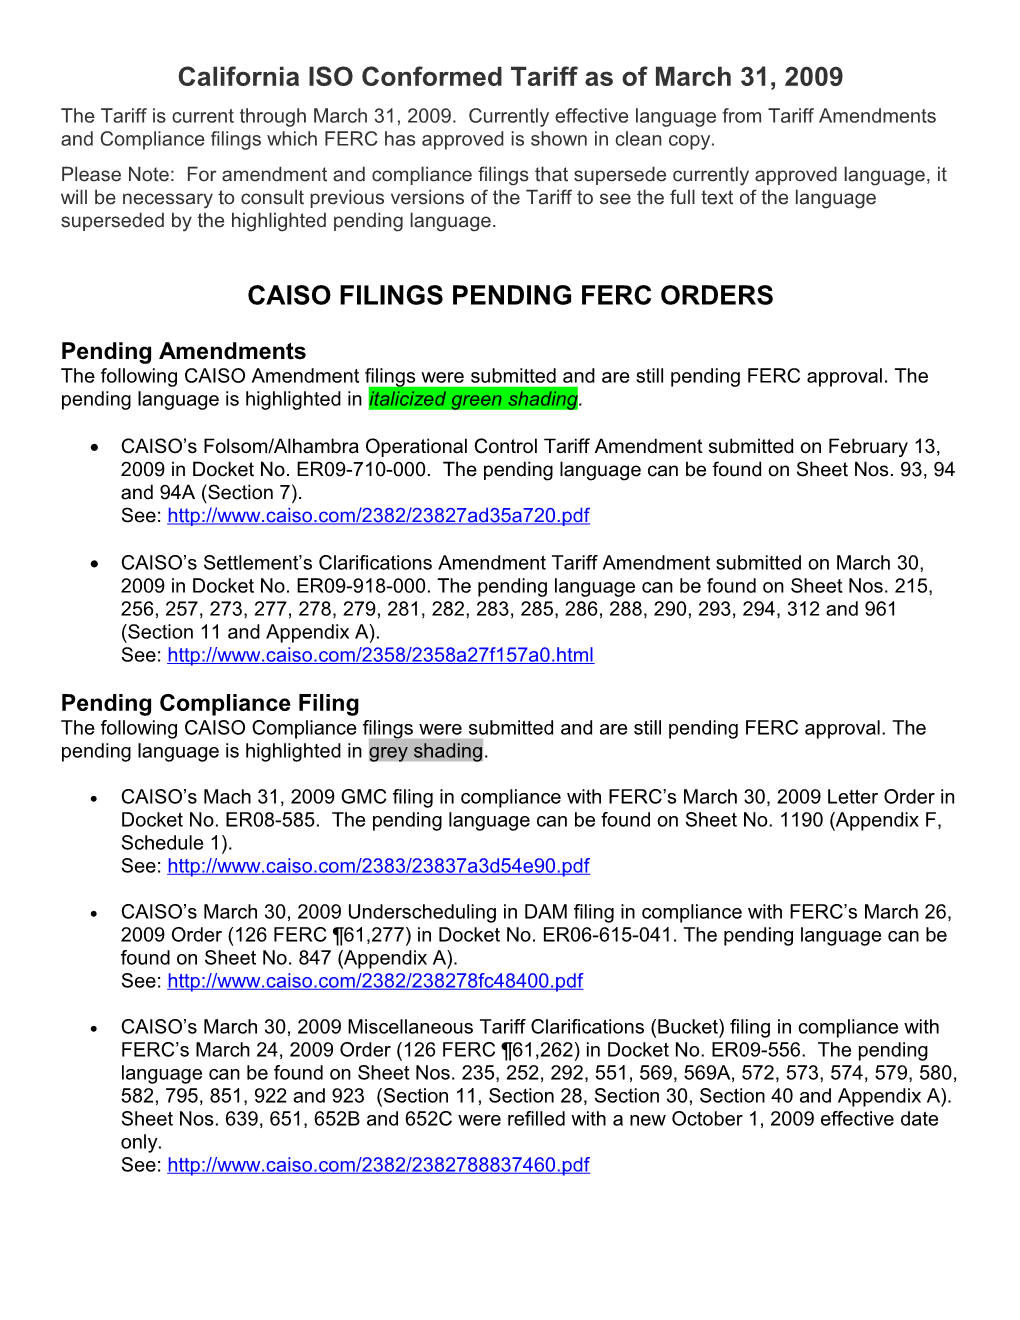 Website Notes Detailing Pending and Updated Language 31-Mar-09